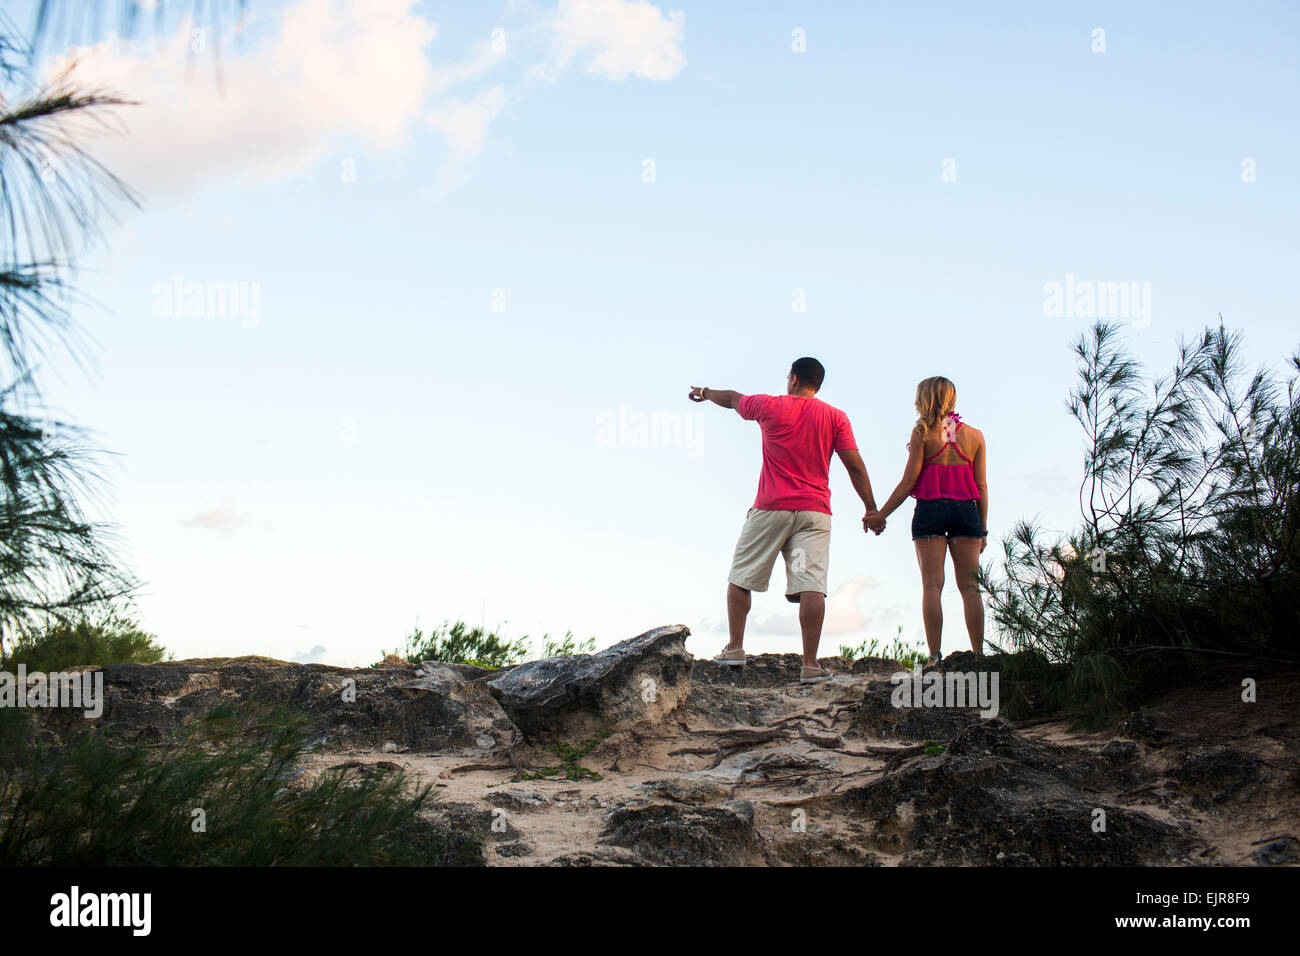 Low angle view of couple enjoying scenic view at beach Banque D'Images